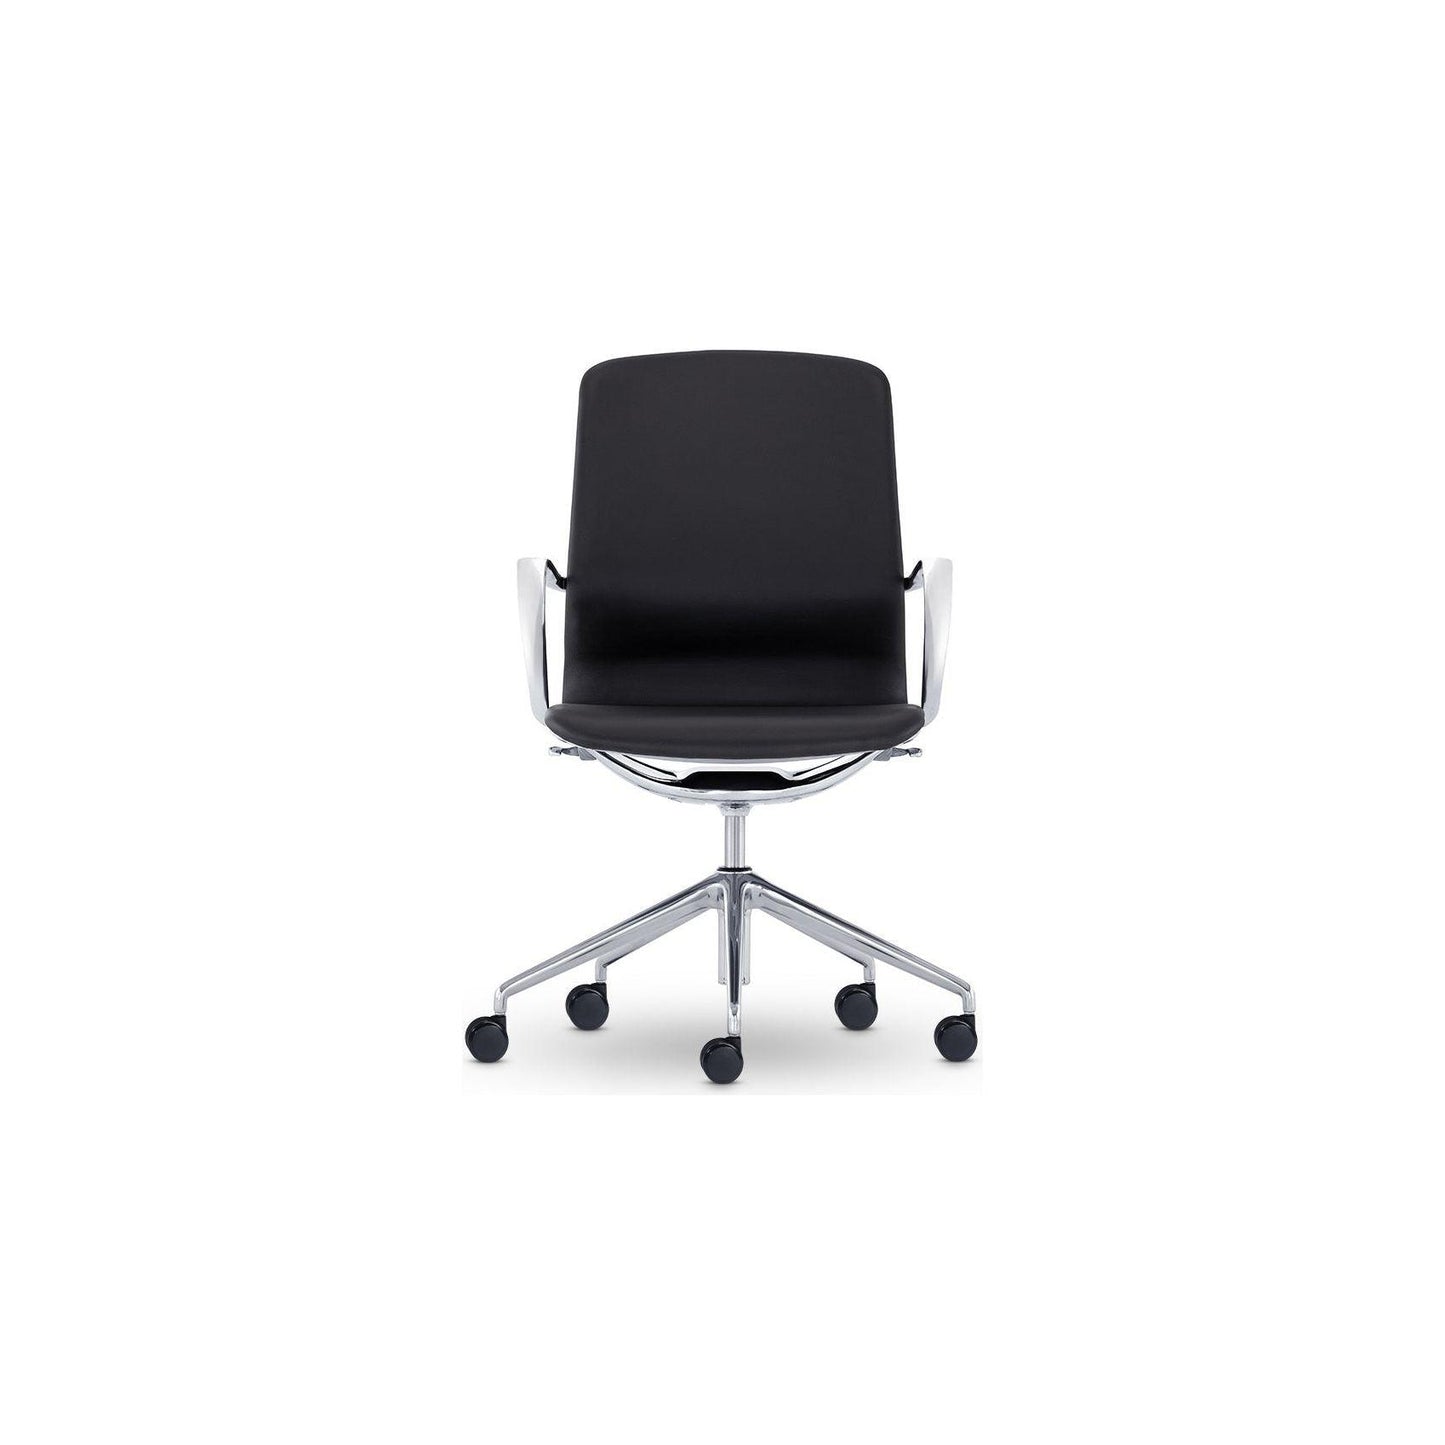 Meta Executive Meeting Chair in Black Leather - Office Furniture Company 